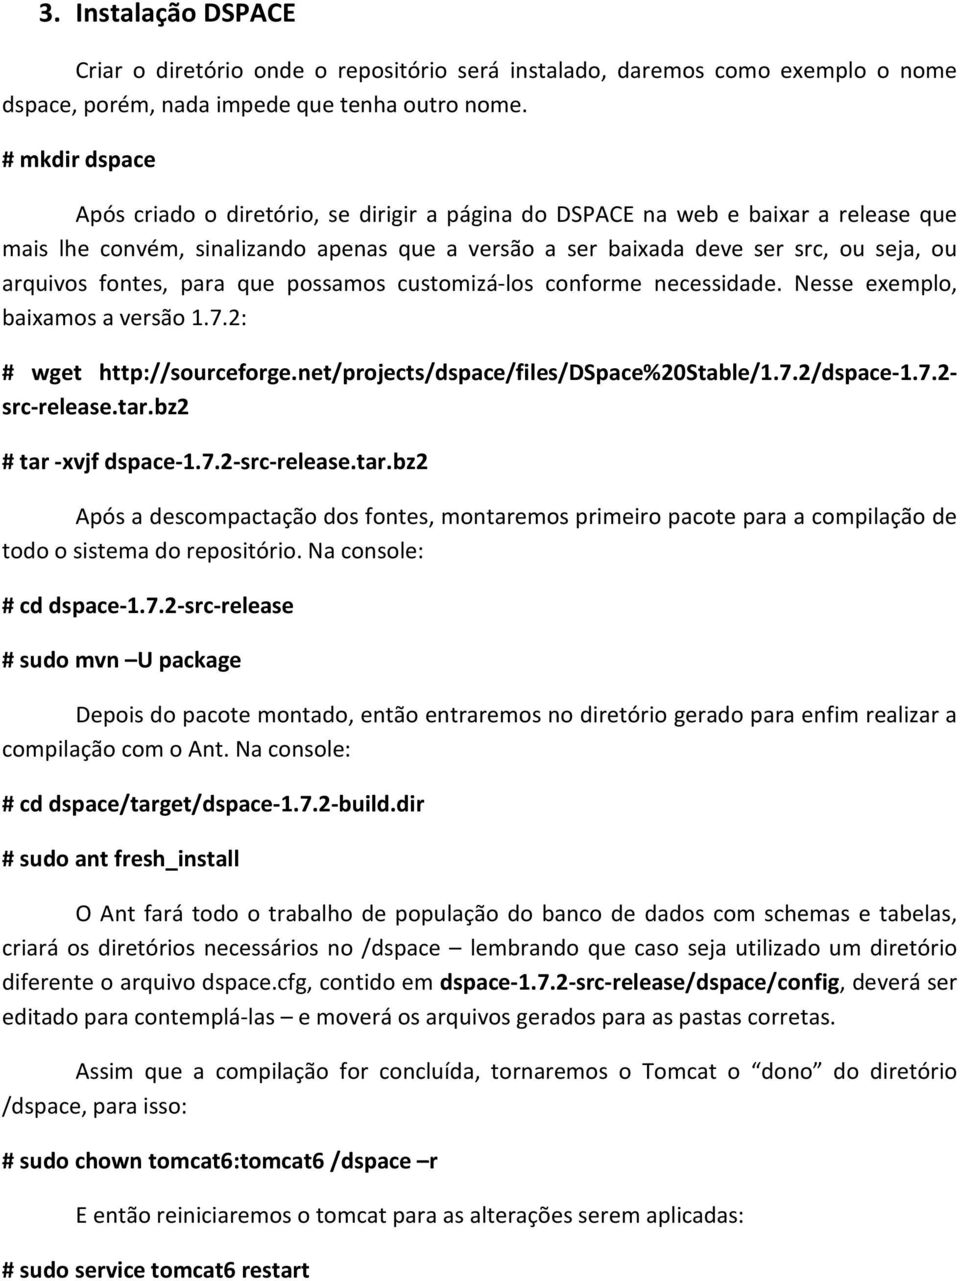 fontes, para que possamos customizá-los conforme necessidade. Nesse exemplo, baixamos a versão 1.7.2: # wget http://sourceforge.net/projects/dspace/files/dspace%20stable/1.7.2/dspace-1.7.2- src-release.